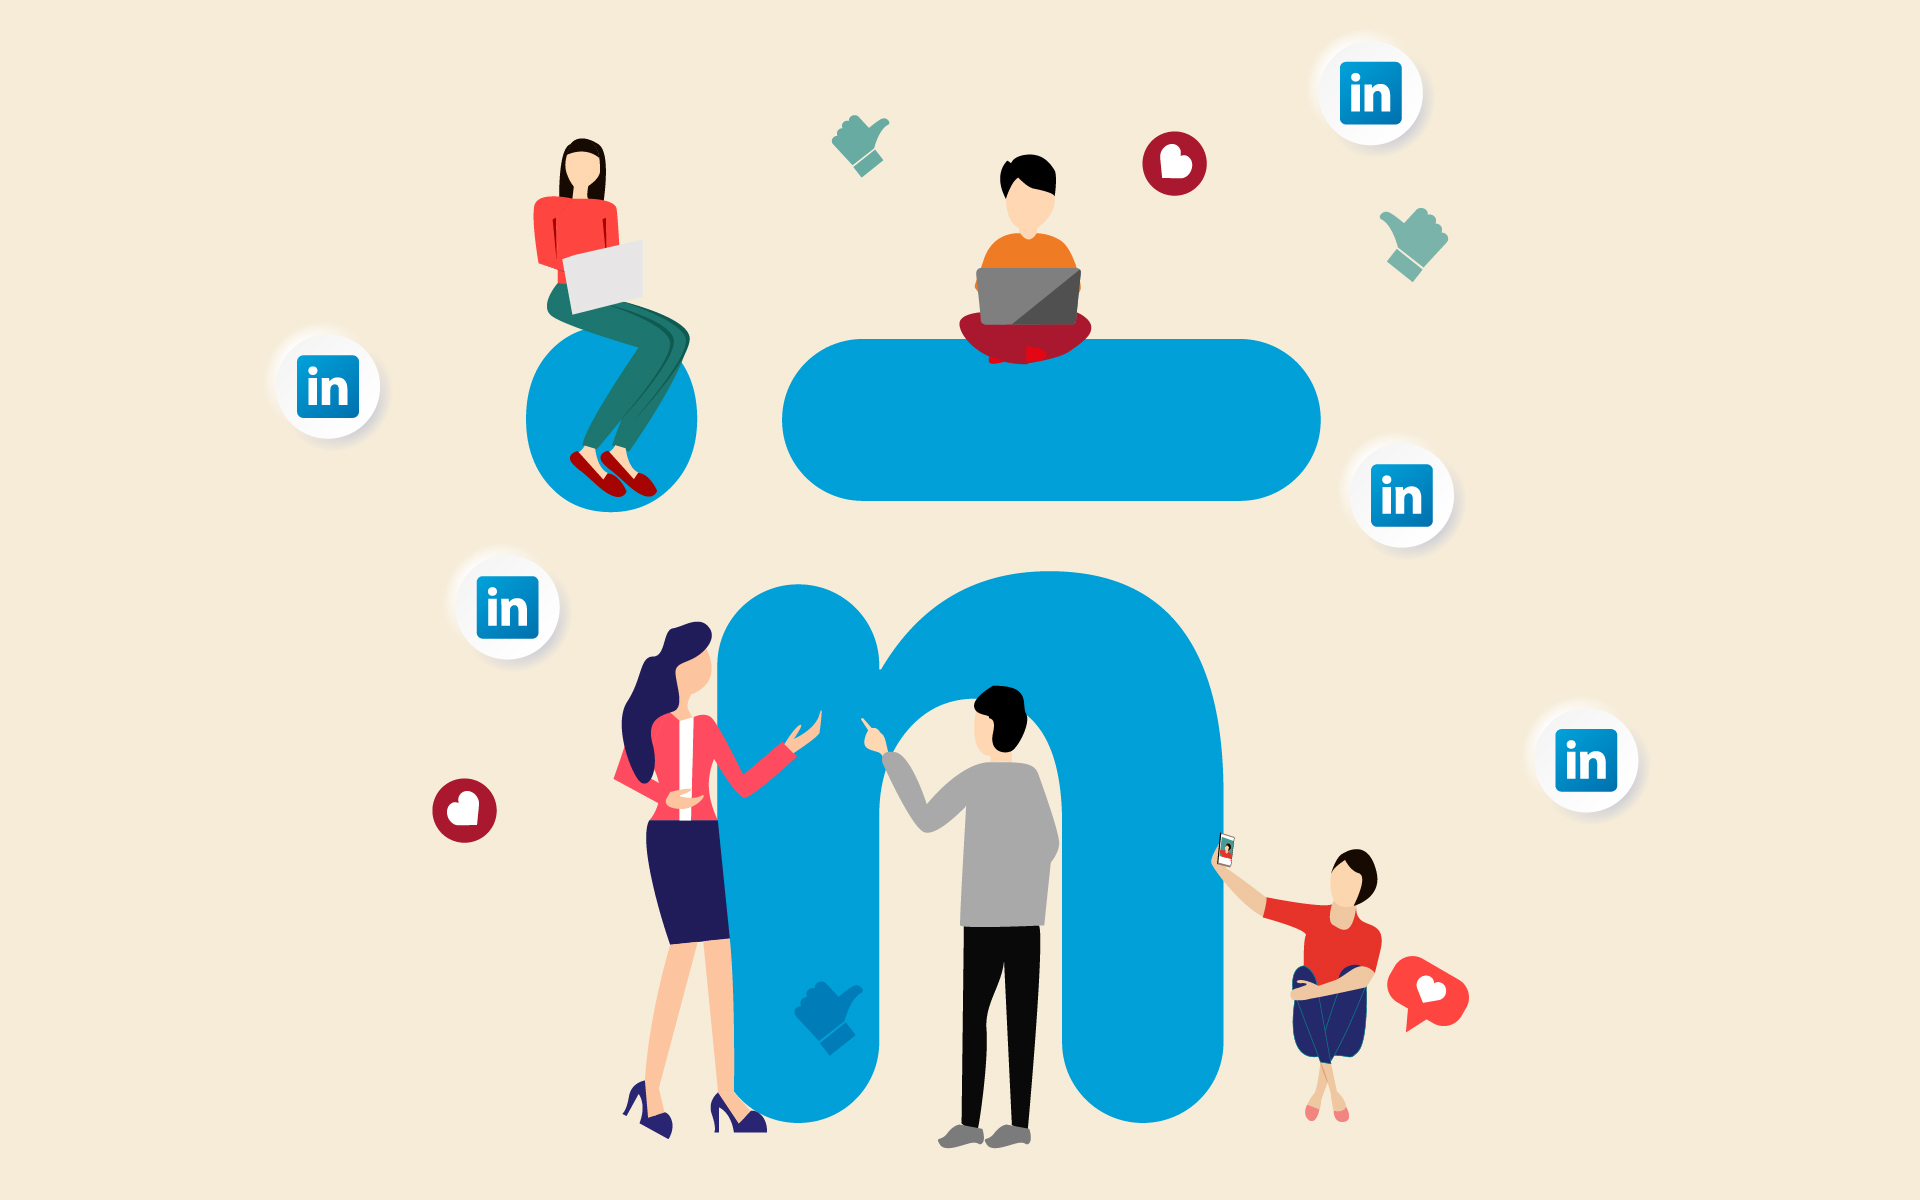 Seven sure ways to stand out & get yourself noticed on LinkedIn